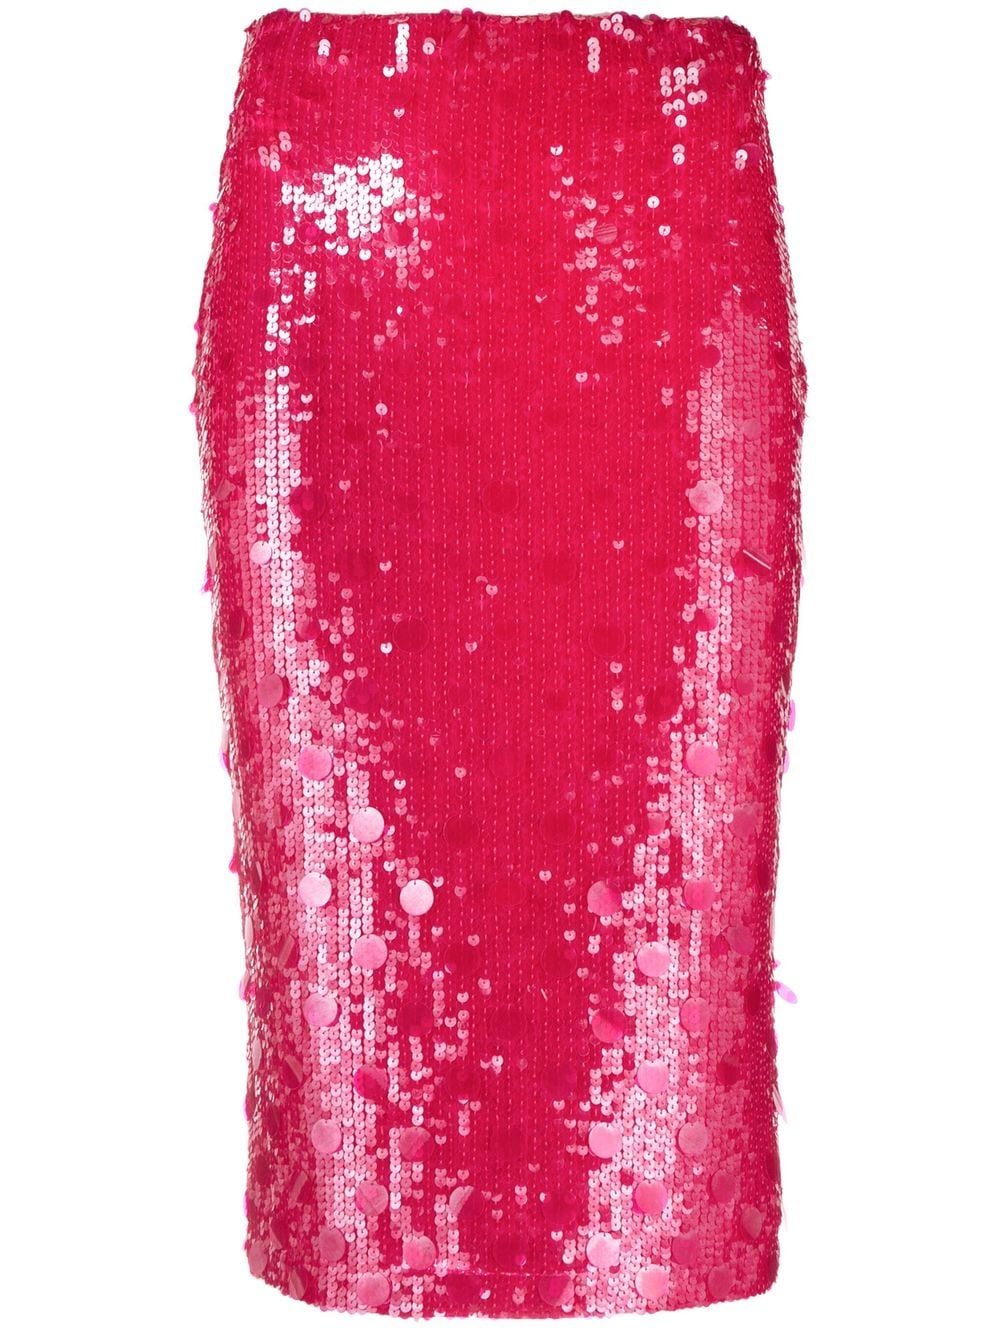 P.a.r.o.s.h Sequin-embellished Pencil Skirt In Fuchsia